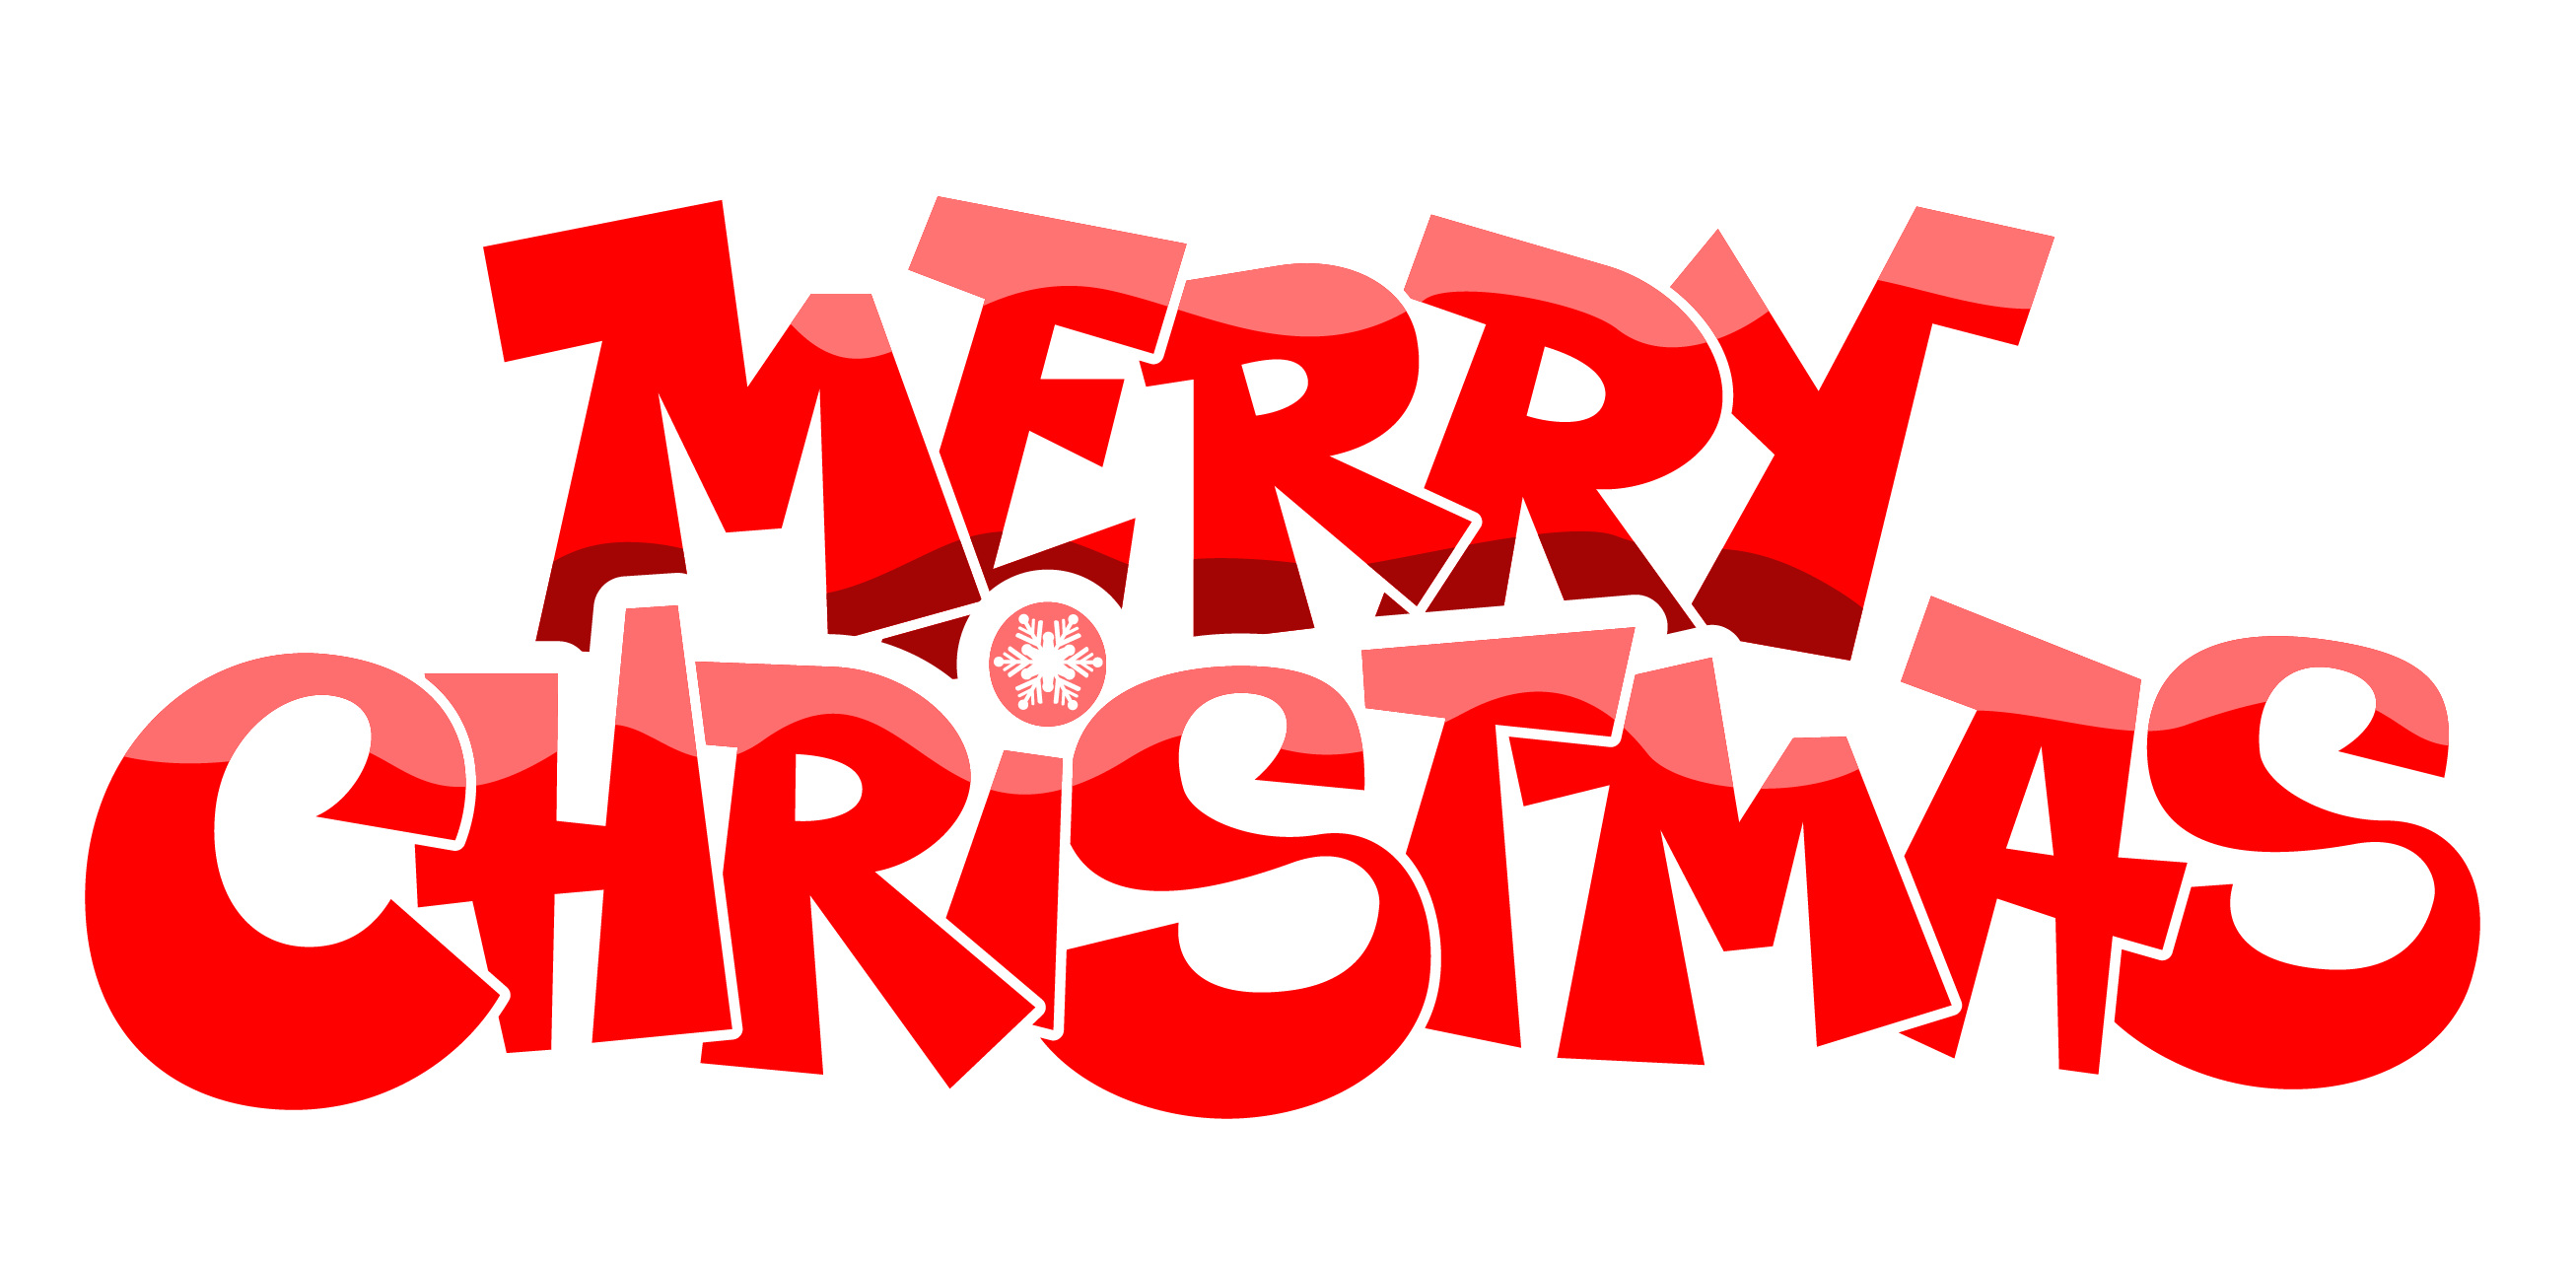 Google.com Christmas Logo - Merry Christmas Transparent PNG Pictures - Free Icons and PNG ...